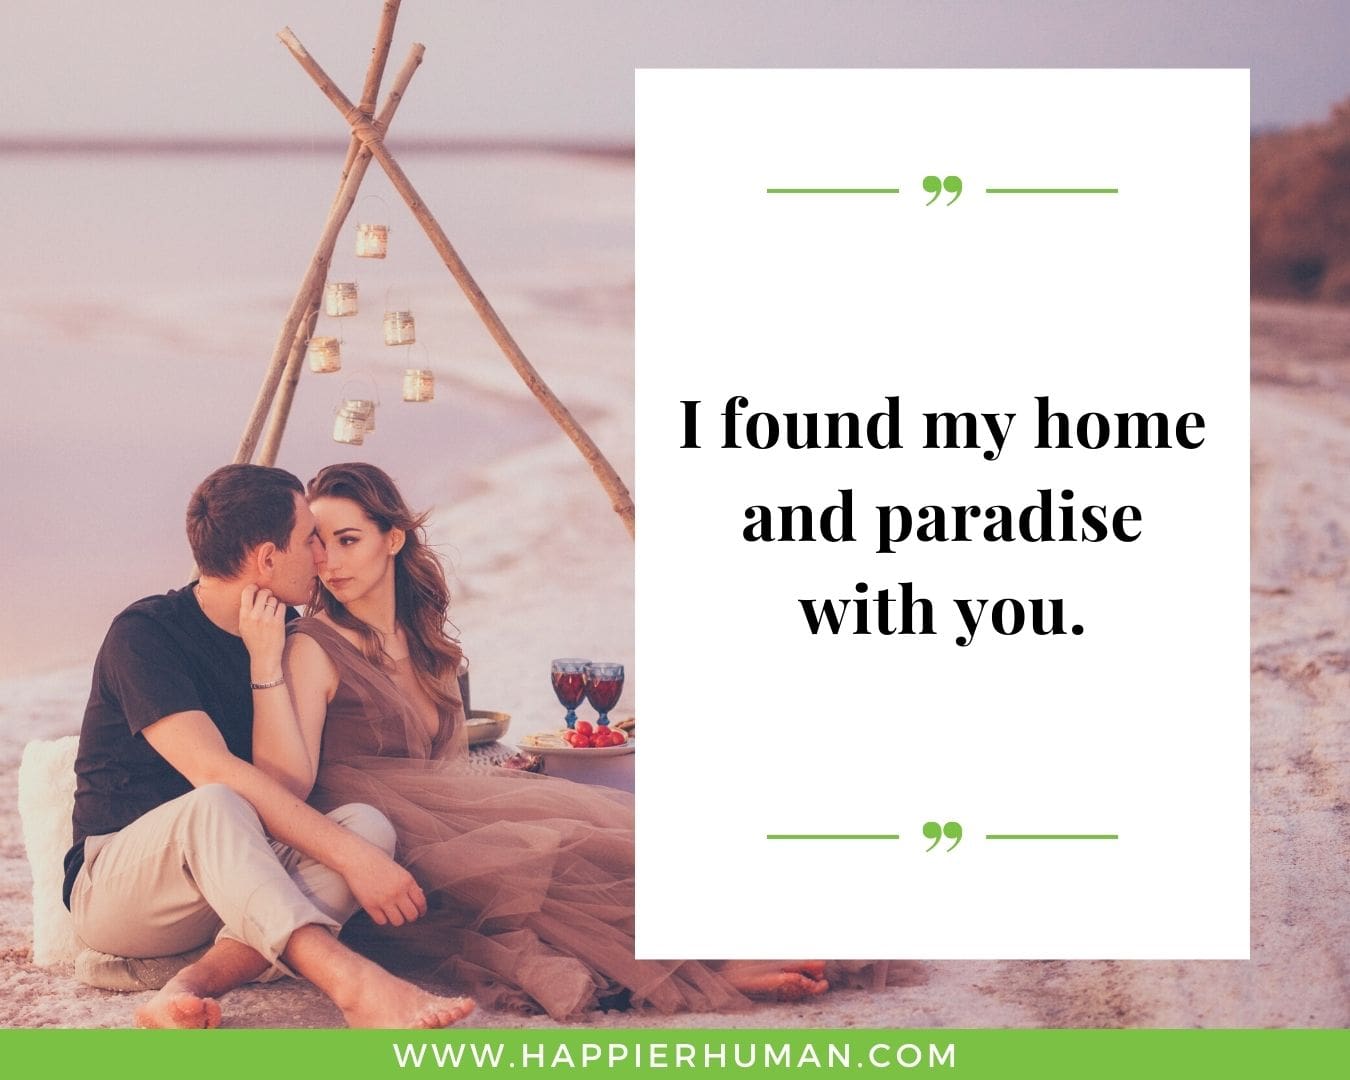 Short, Deep Love Quotes for Her - “I found my home and paradise with you.”